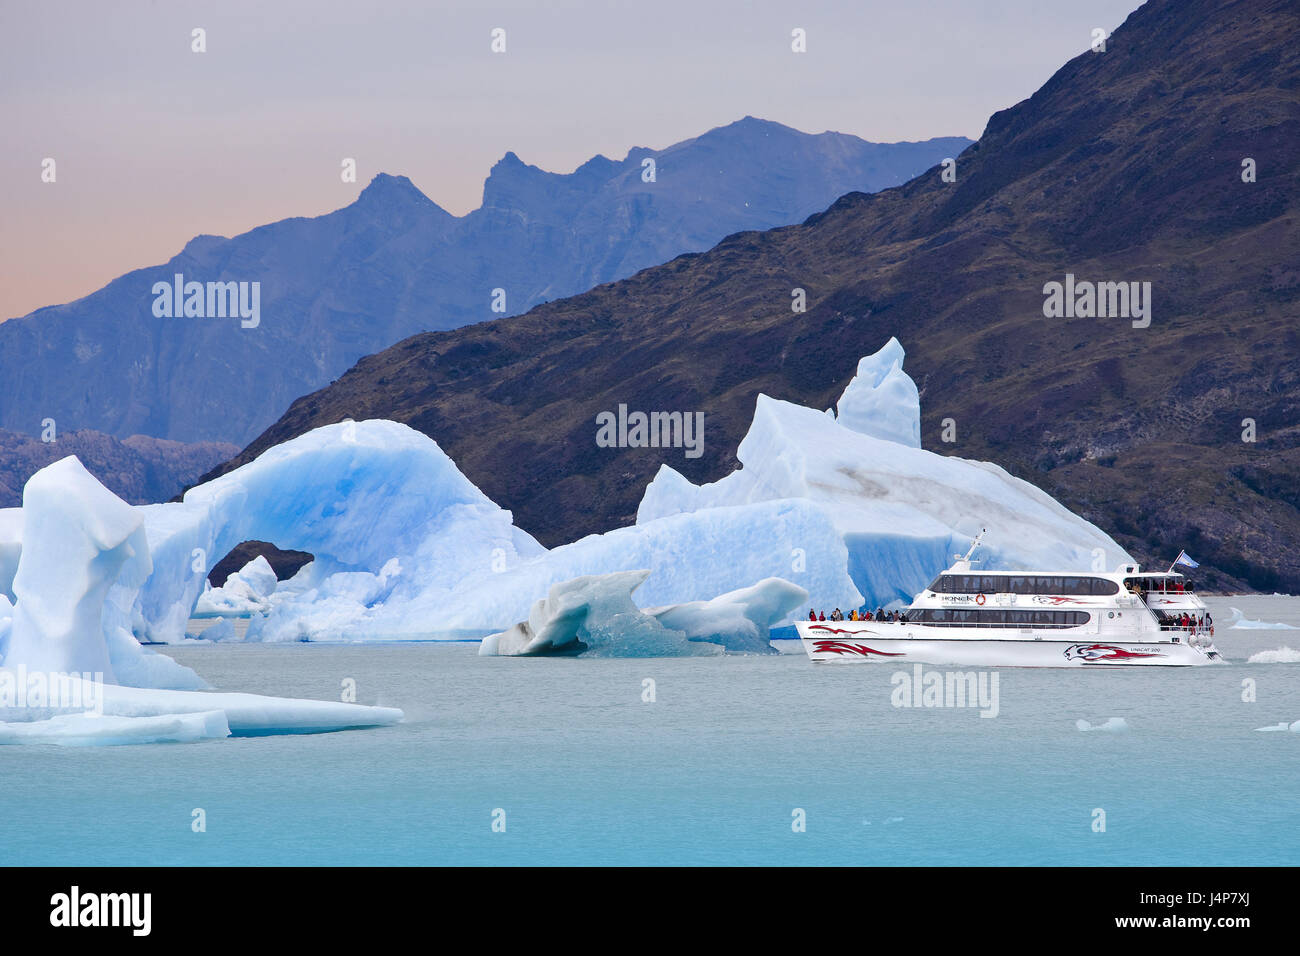 Argentina, Patagonia, Glaciers Nationwide park, Lago Argentino, floes, tourist boot, Stock Photo